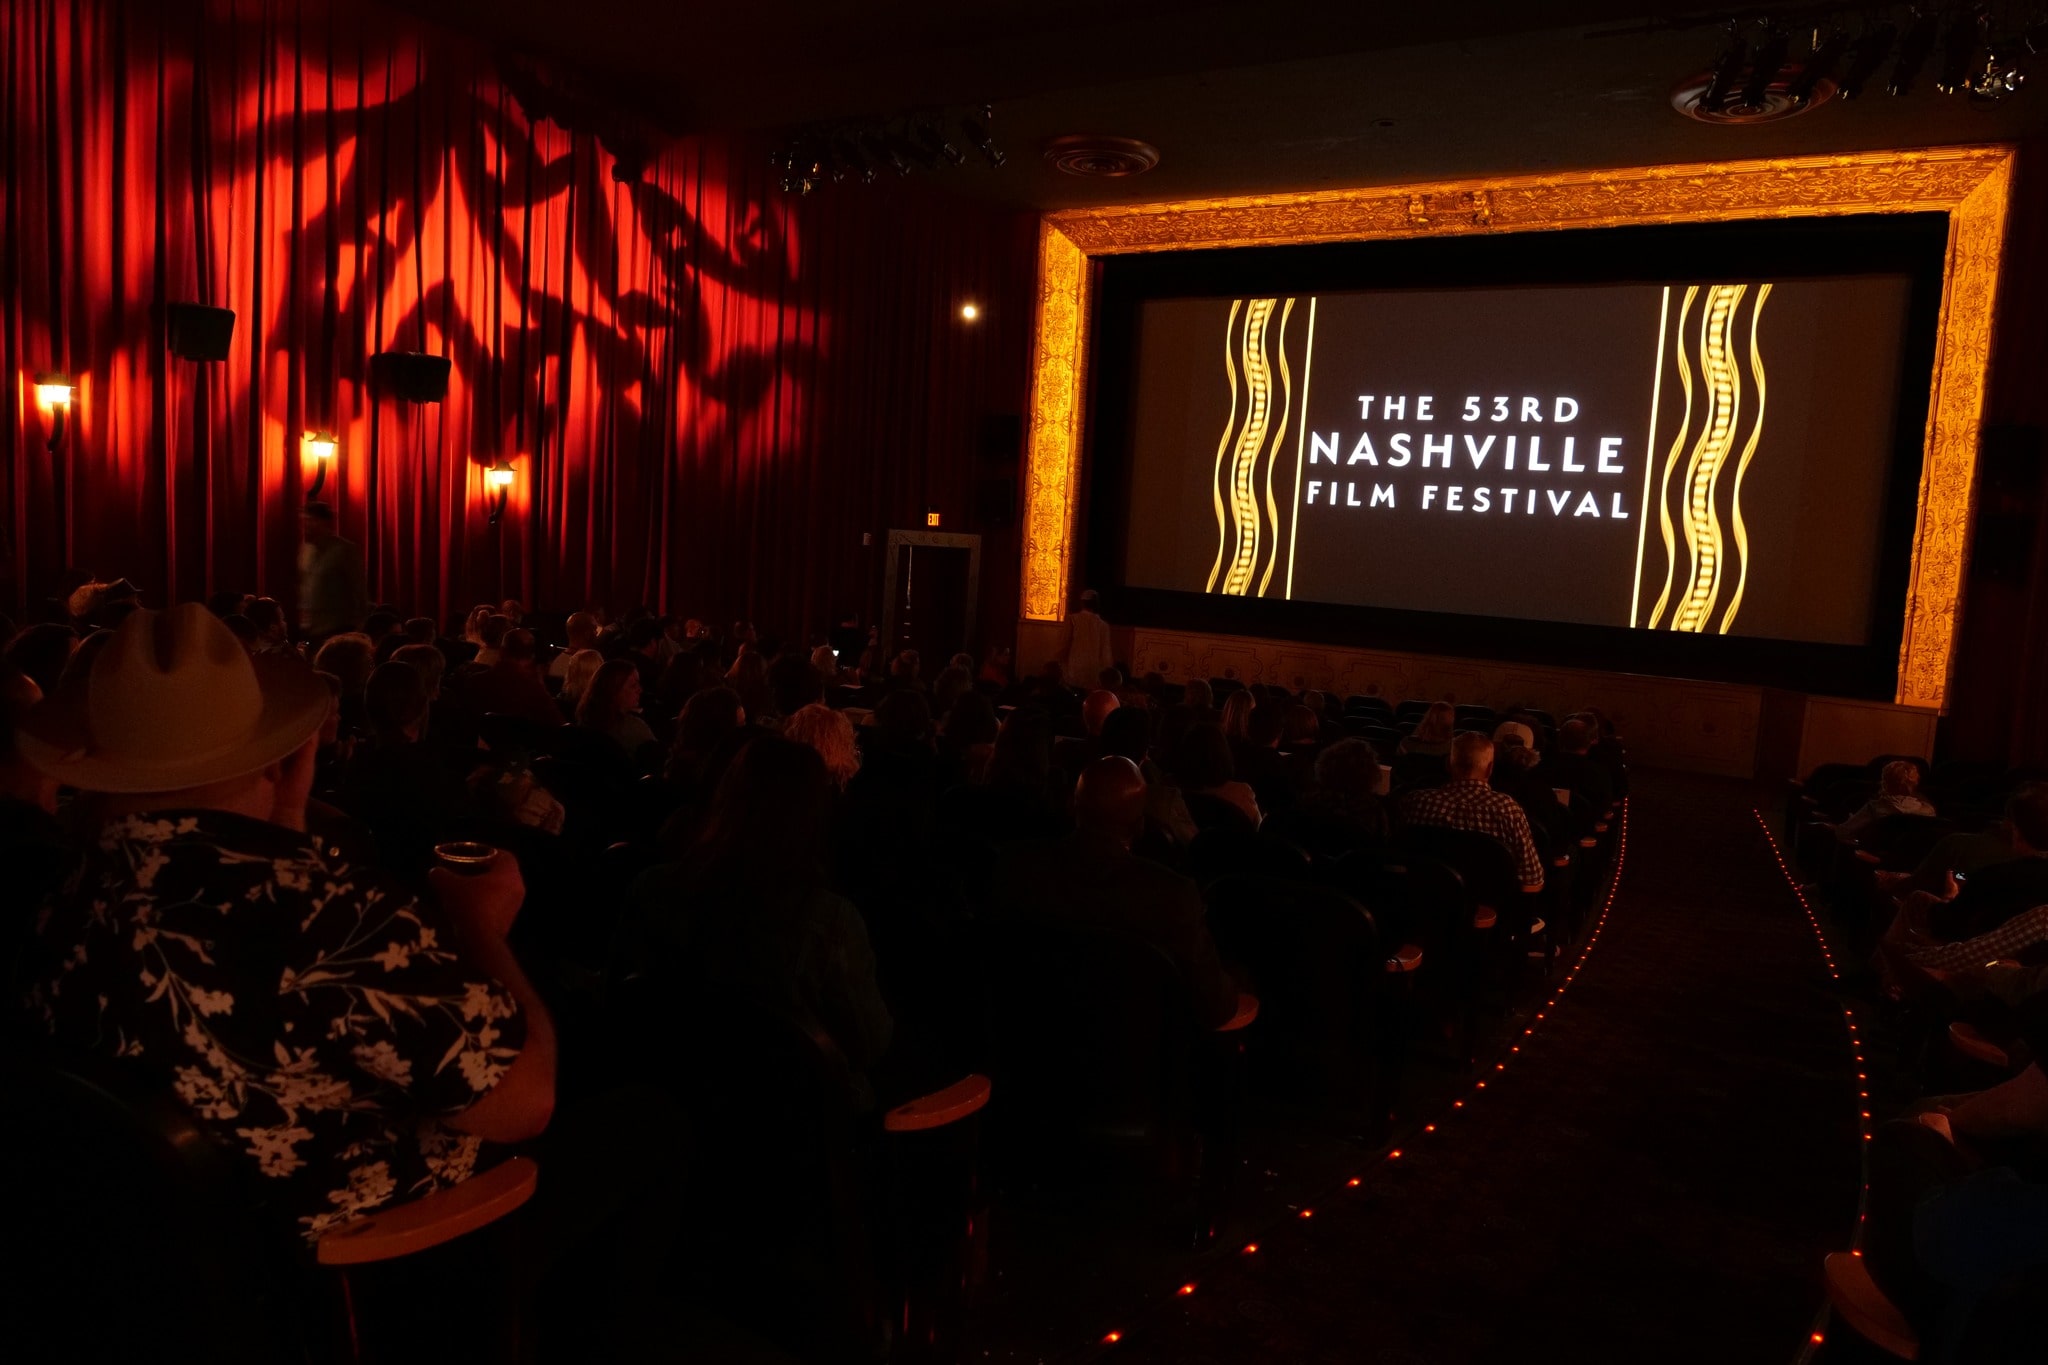 the 2022/53rd nashville film festival with people watching a tv screen in a dark theatre